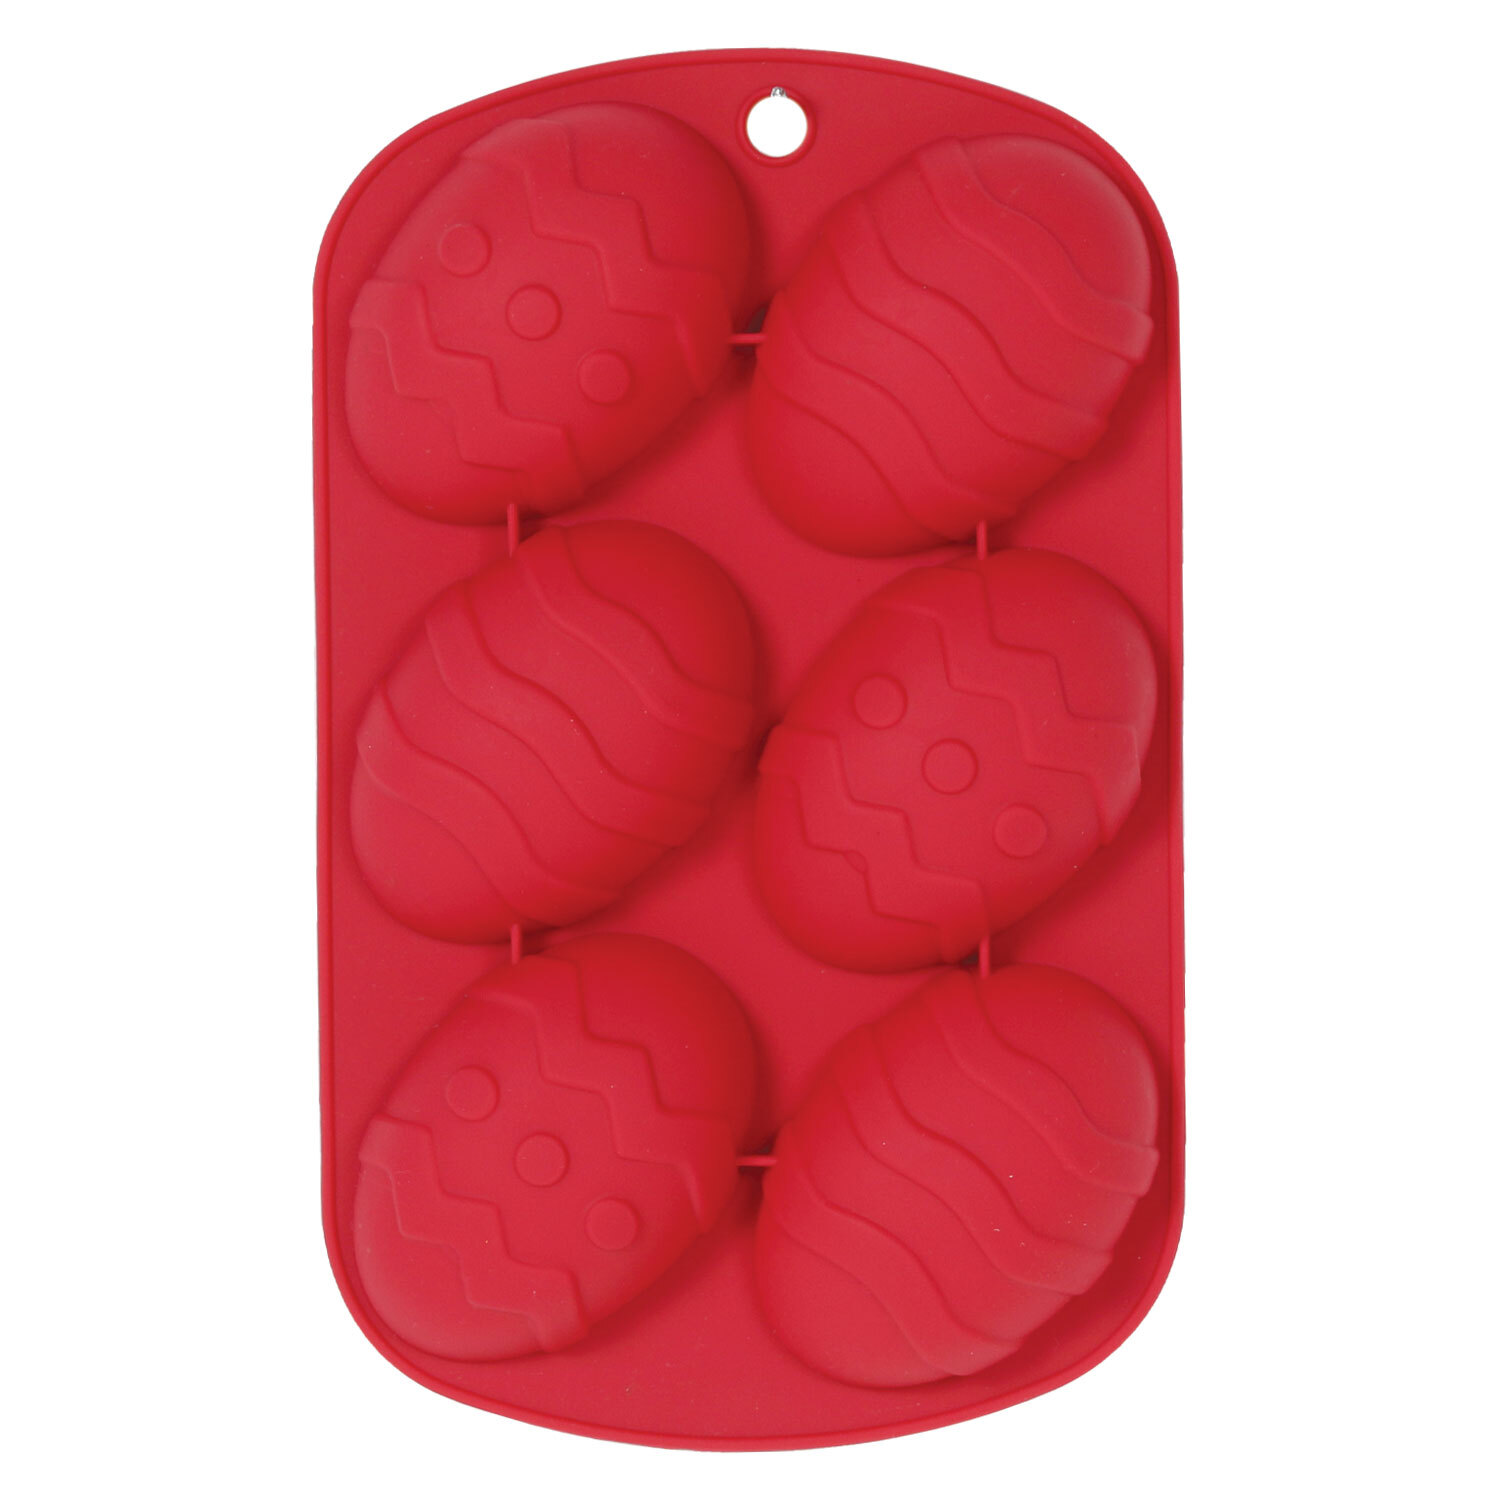 Silicone Easter Egg Mould Image 1